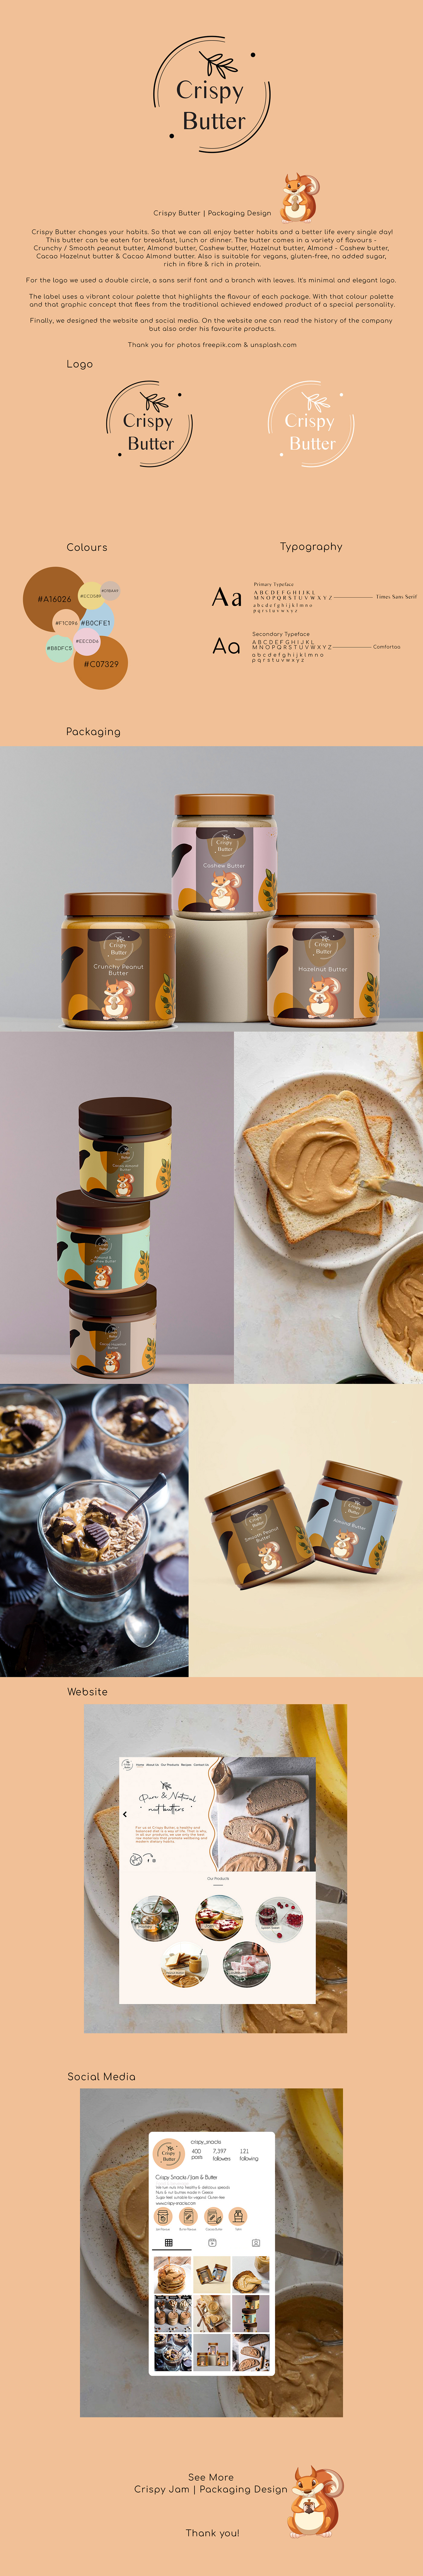 Packaging packaging design butter logo Label product product design  Social media post Web Design  katerina theodosiadou